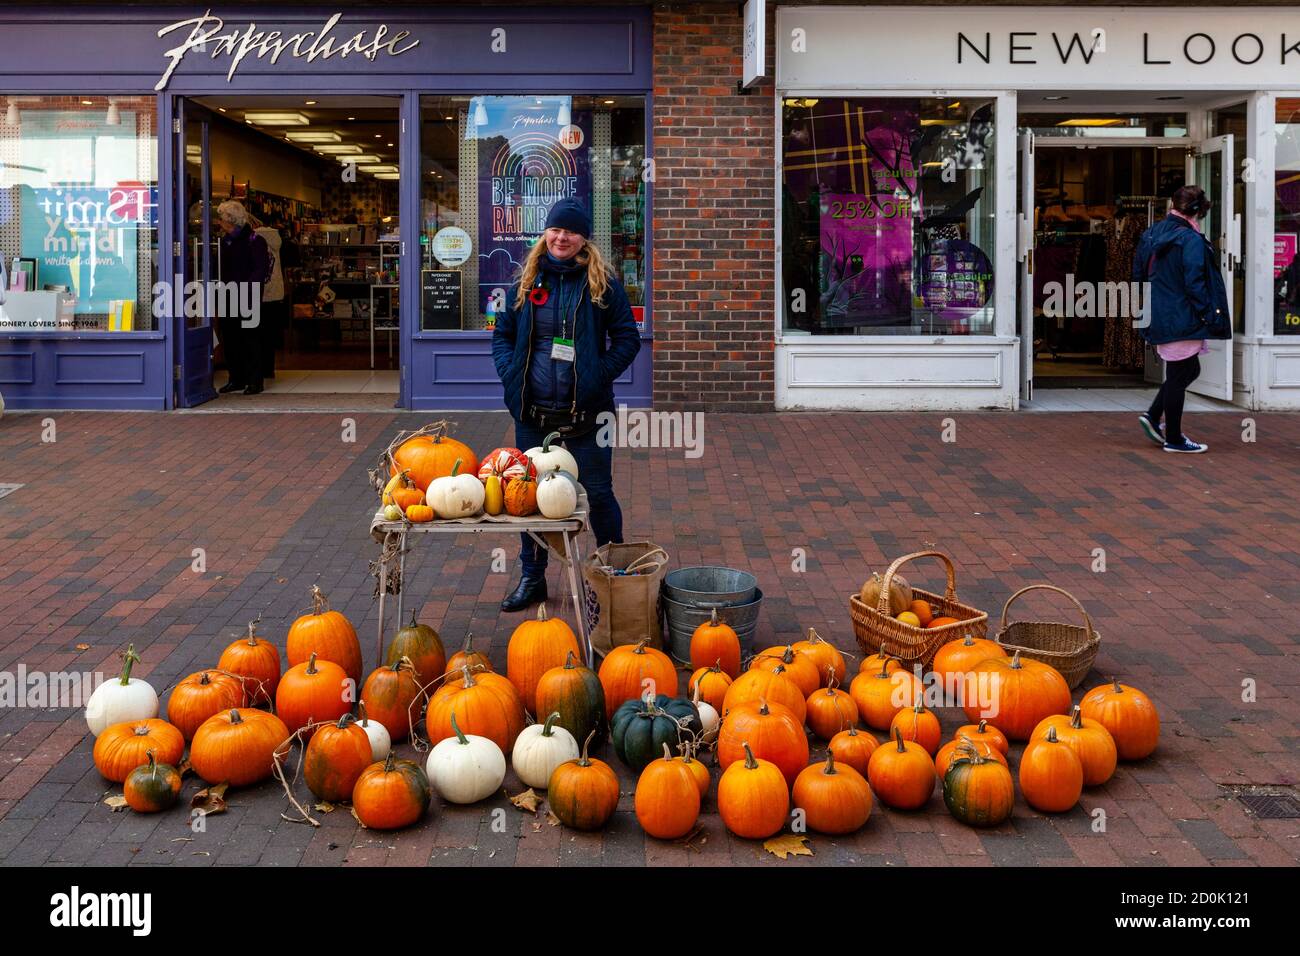 A Young Woman Sells Pumpkins and Squashes, High Street, Lewes, East Sussex, UK. Stock Photo